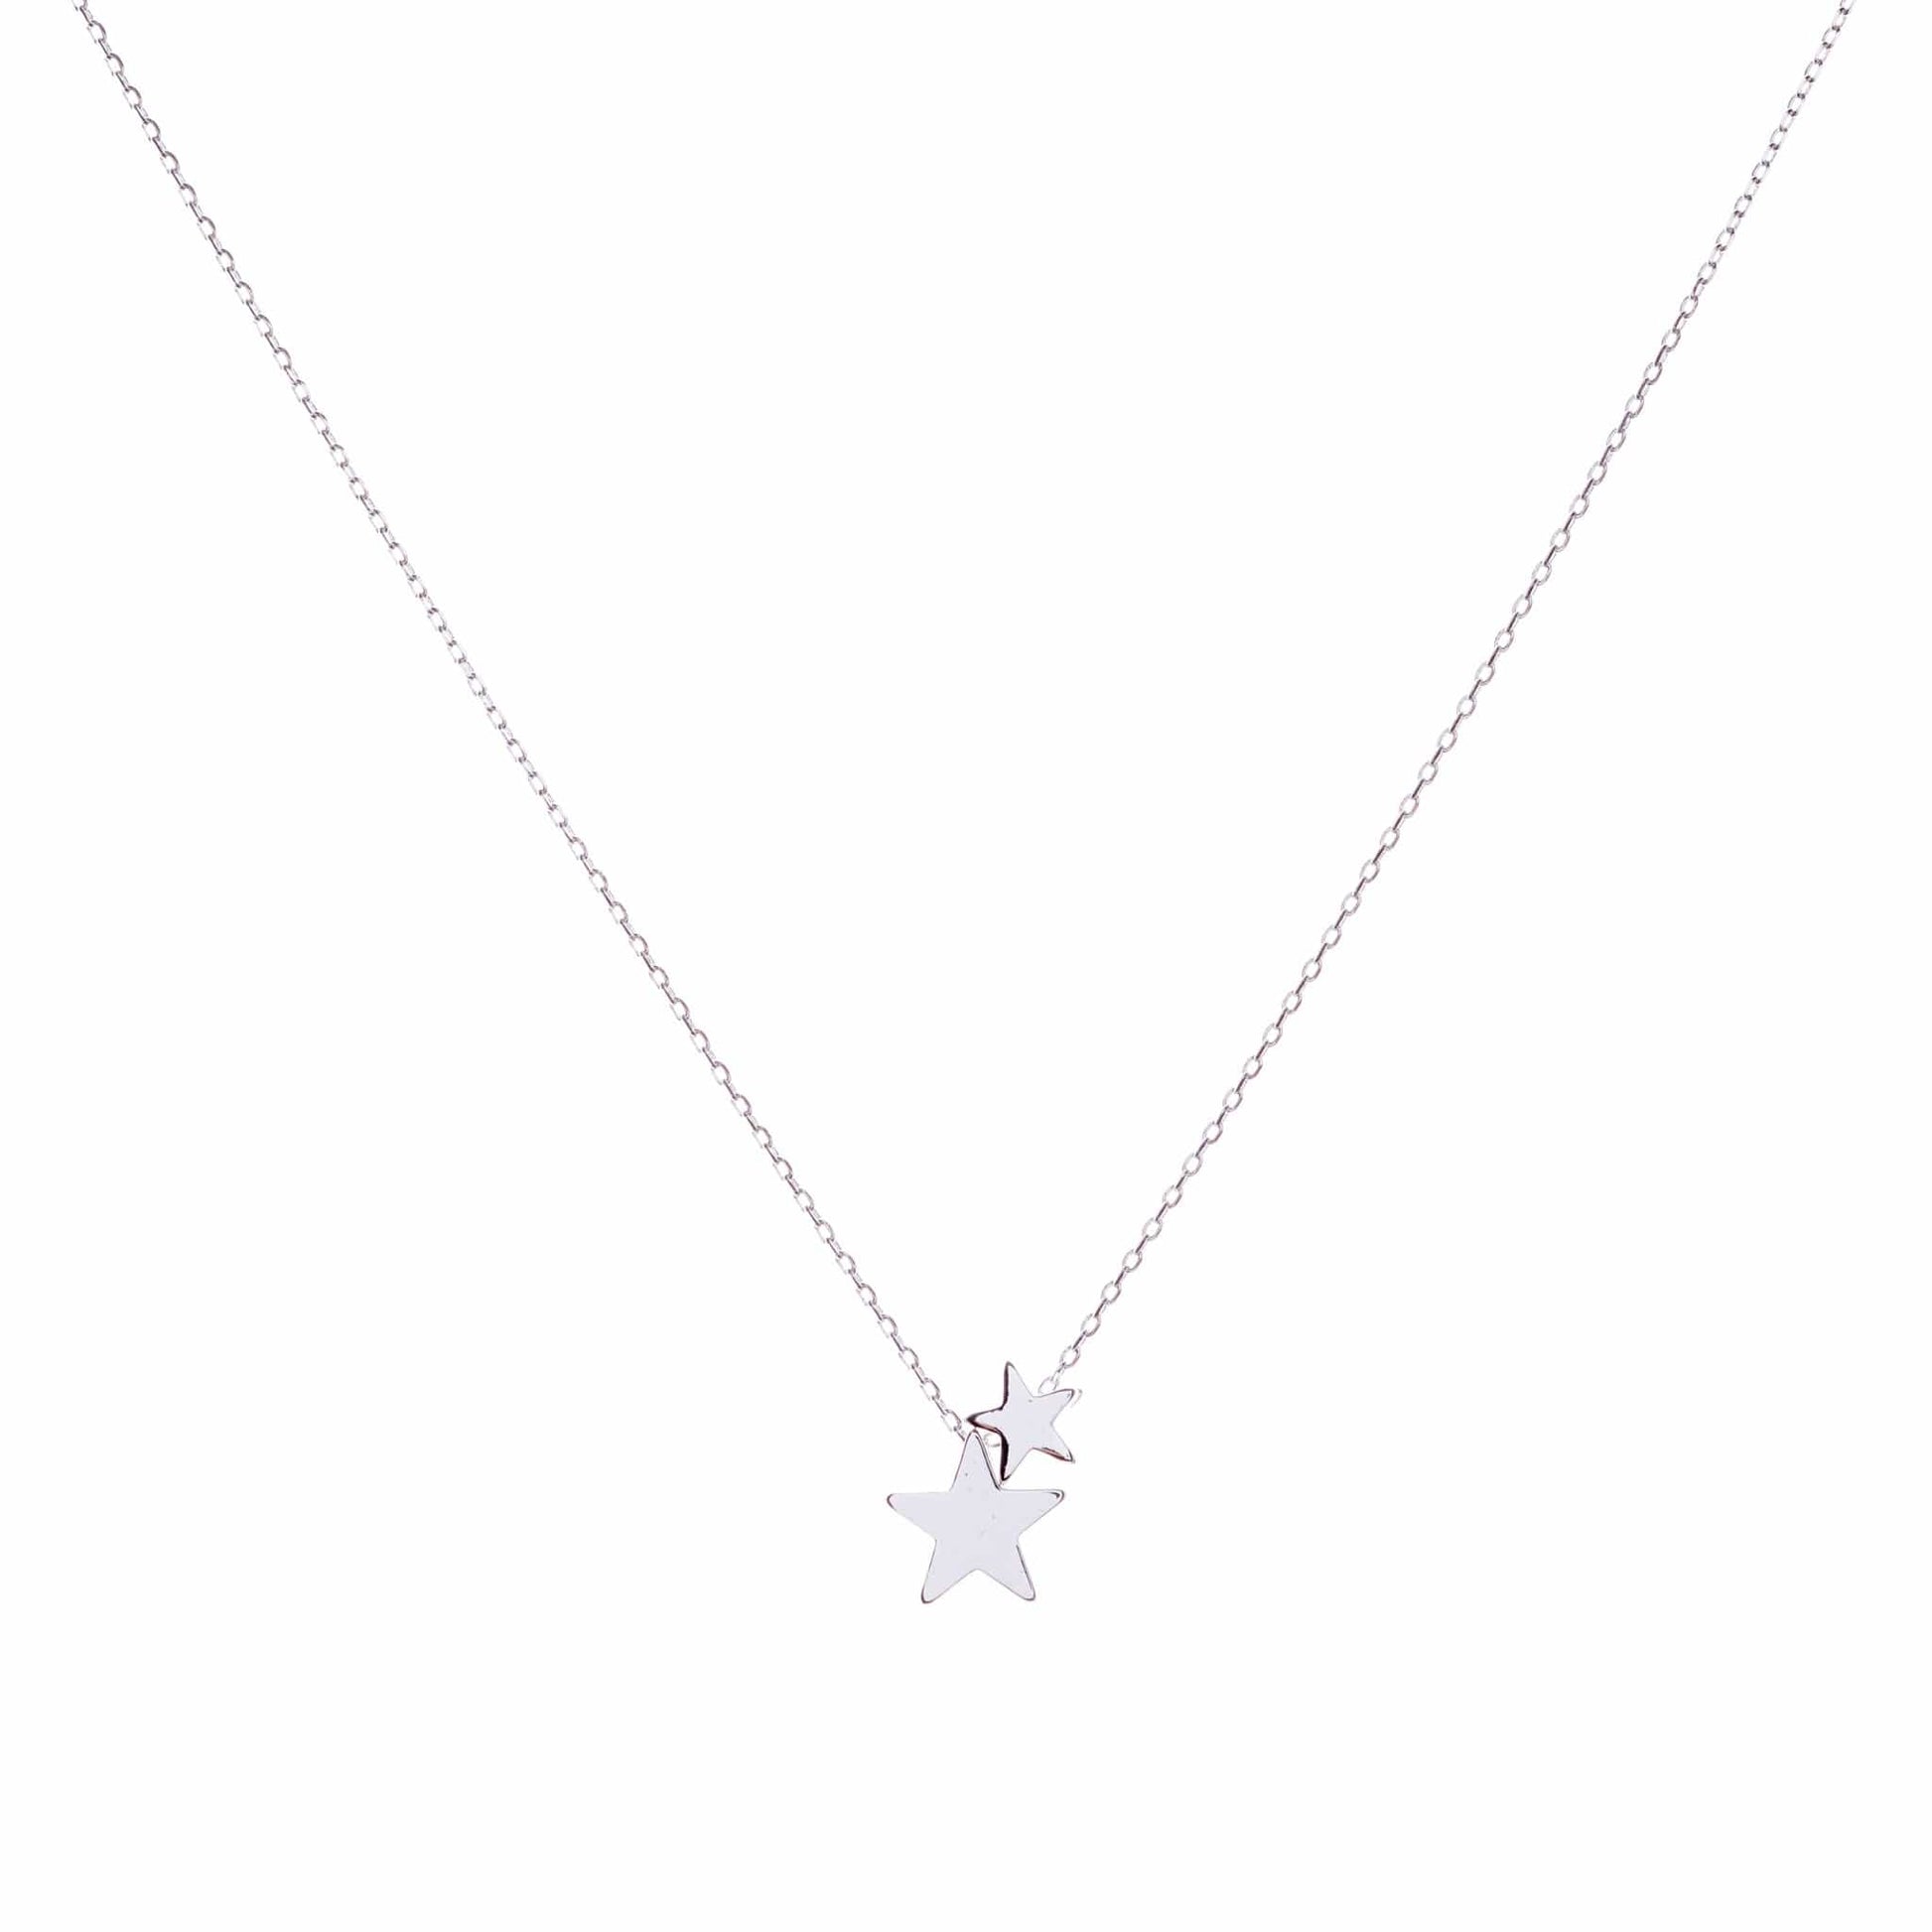 Two silver stars stacked on a delicate silver chain